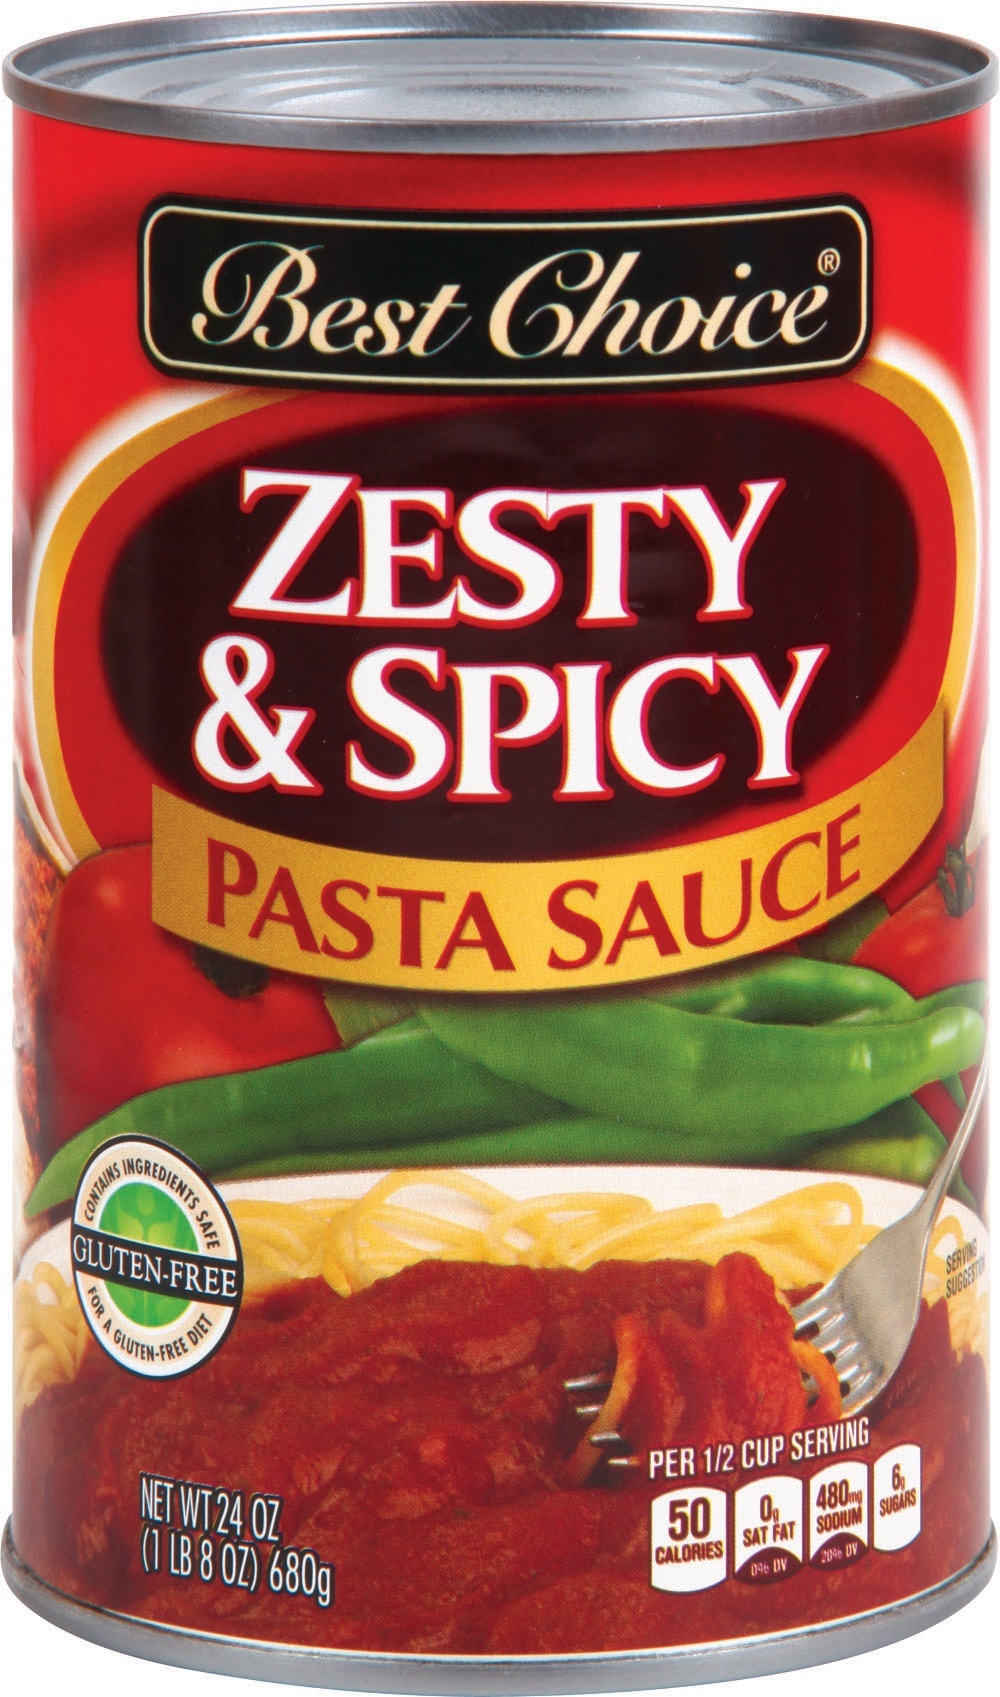 slide 1 of 1, Best Choice Zesty & Spicy Canned Pasta Sauce, 24 oz